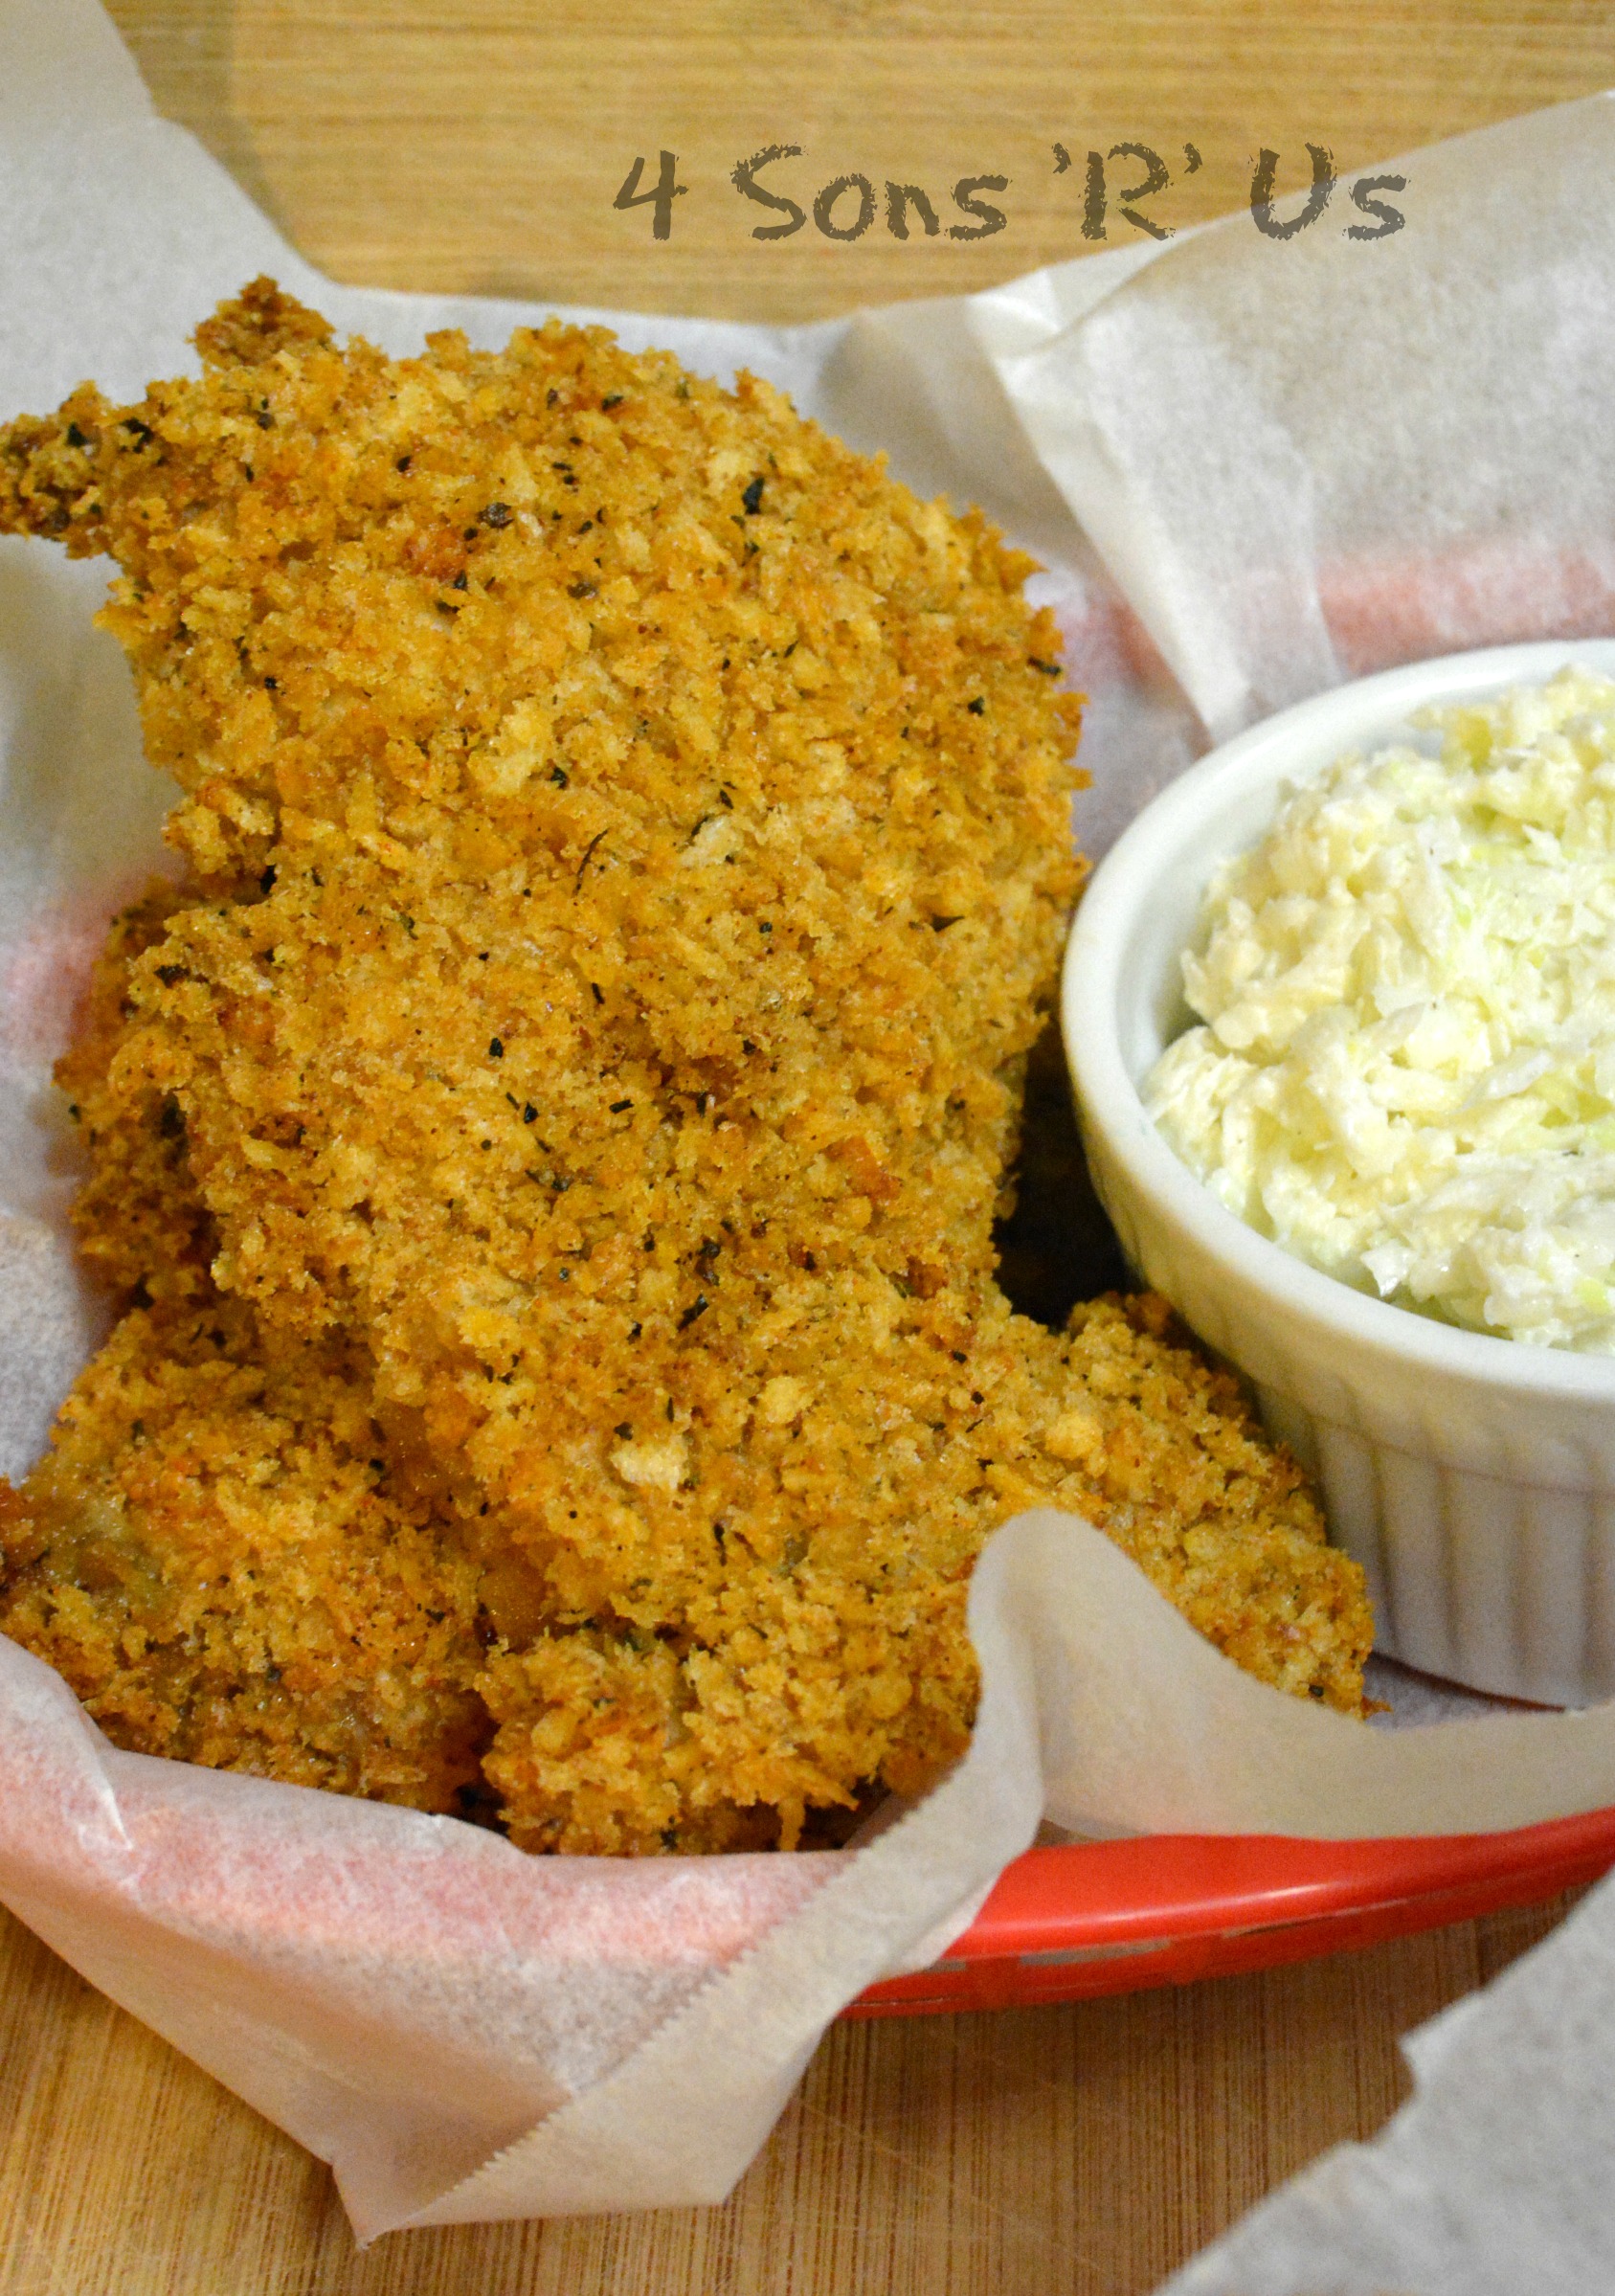 Oven Fried Chicken with 3 Ingredient Coleslaw 2 - 4 Sons 'R' Us